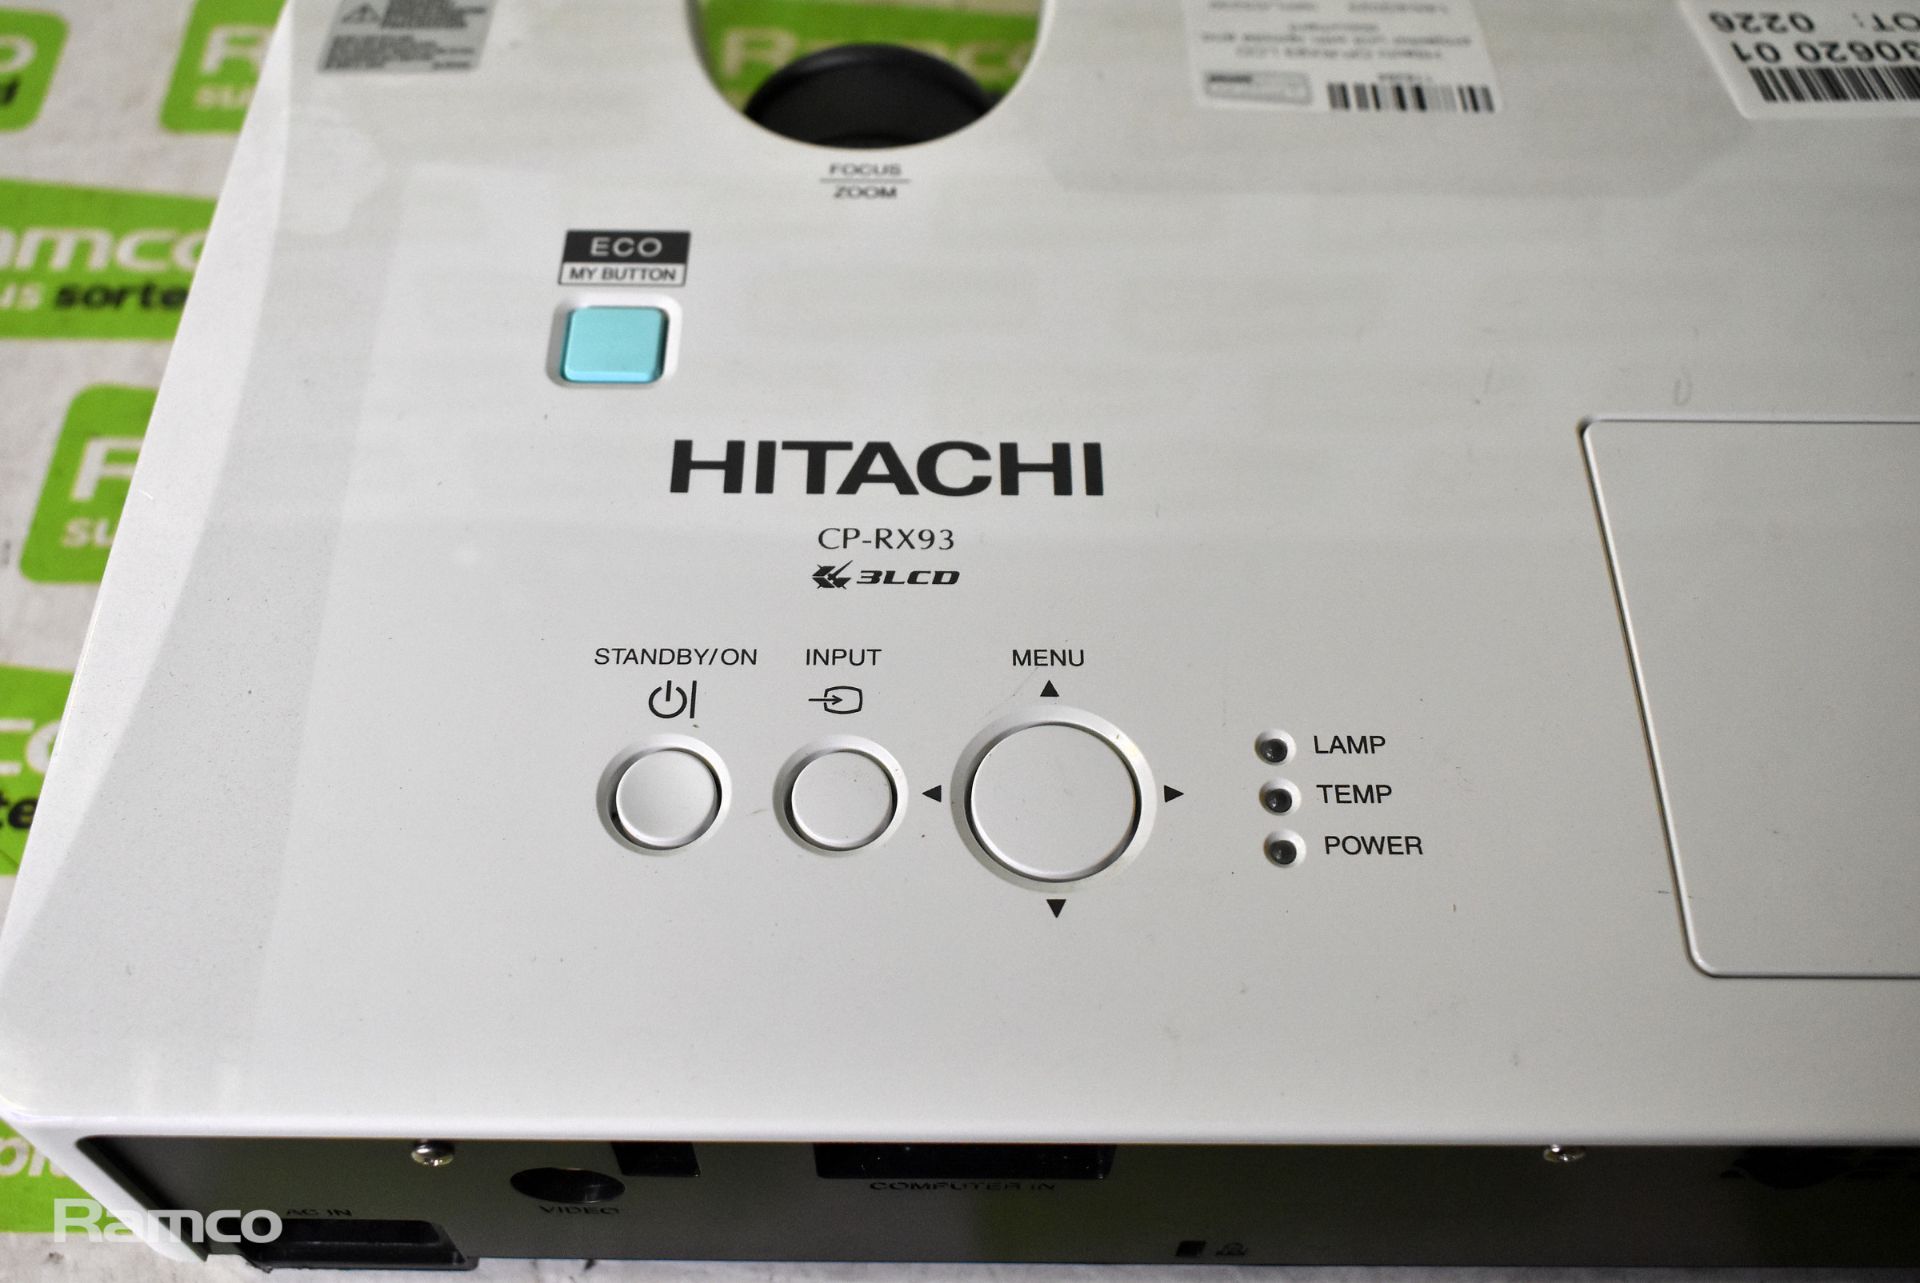 Hitachi CP-RX93 LCD projector unit with remote and document - Image 3 of 6